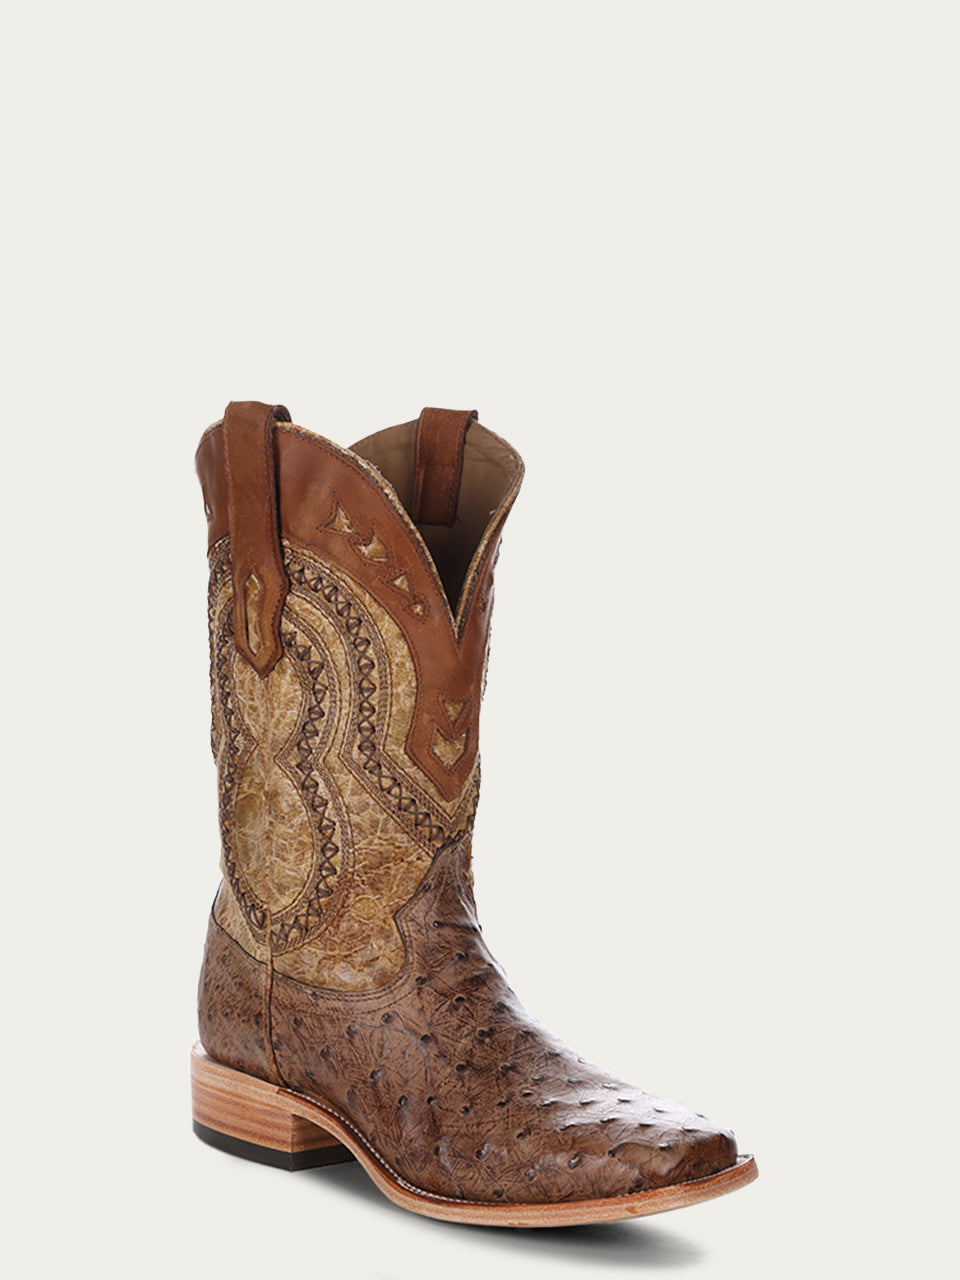 A4008 - MEN'S  BROWN EMBROIDERY WITH WOVEN DETAIL AND OVERLAY  FULL QUILL OSTRICH SQUARE TOE  COWBOY BOOT